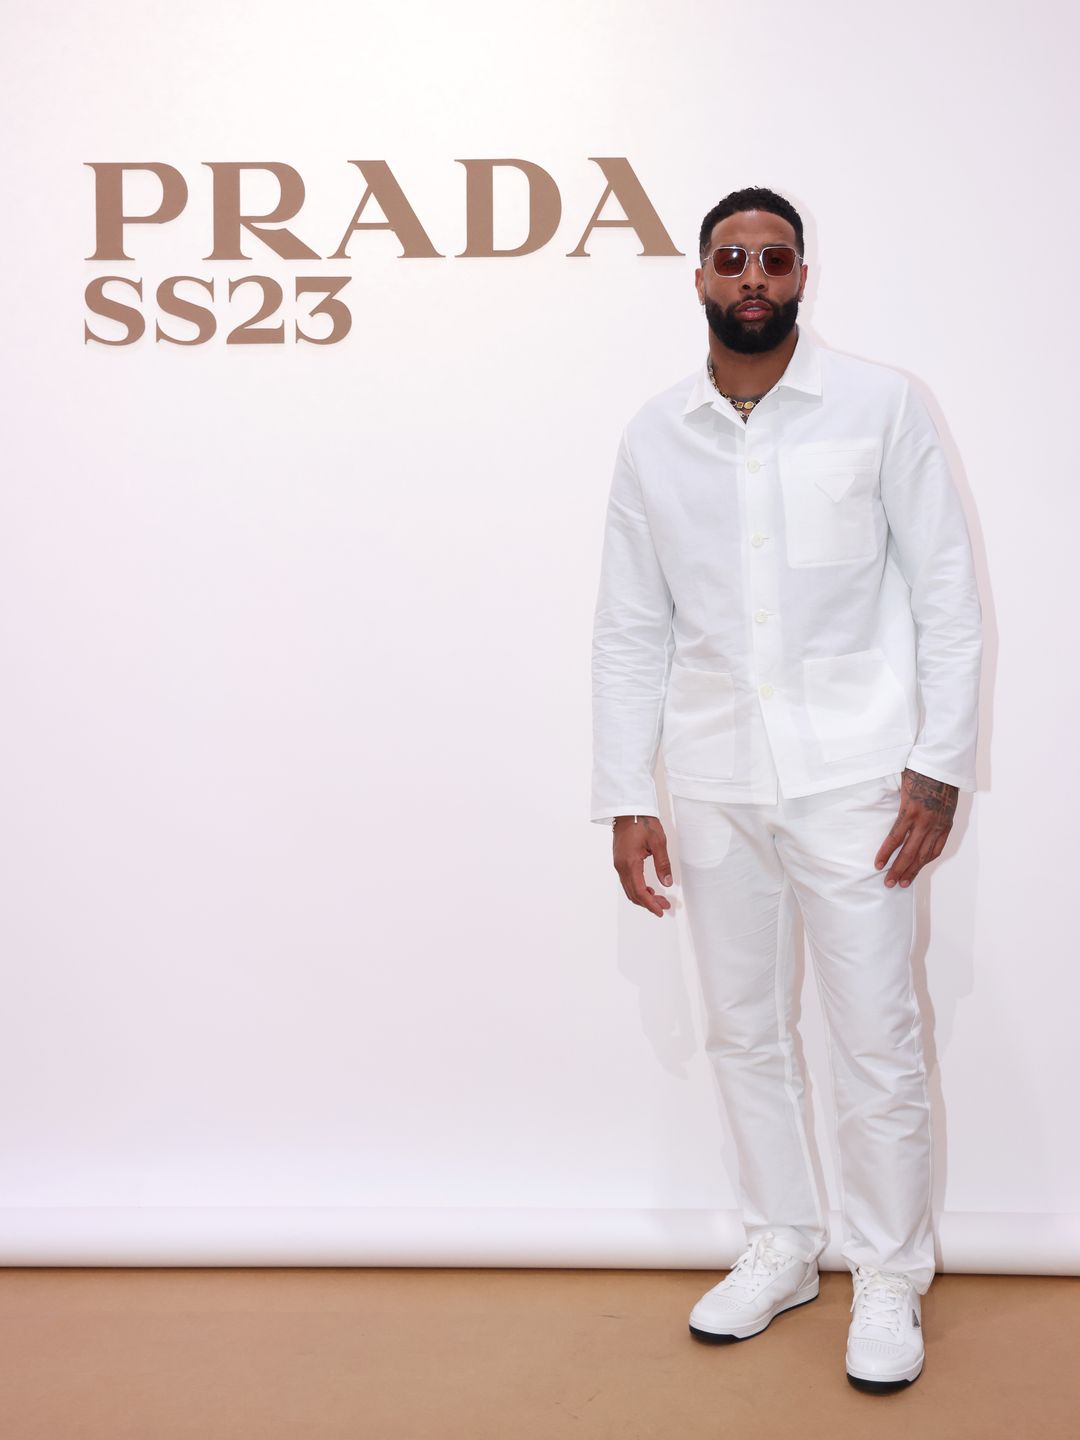 Odell Beckham Jr attends Prada Spring/Summer 2023 Menswear Fashion Show in an all white suit 